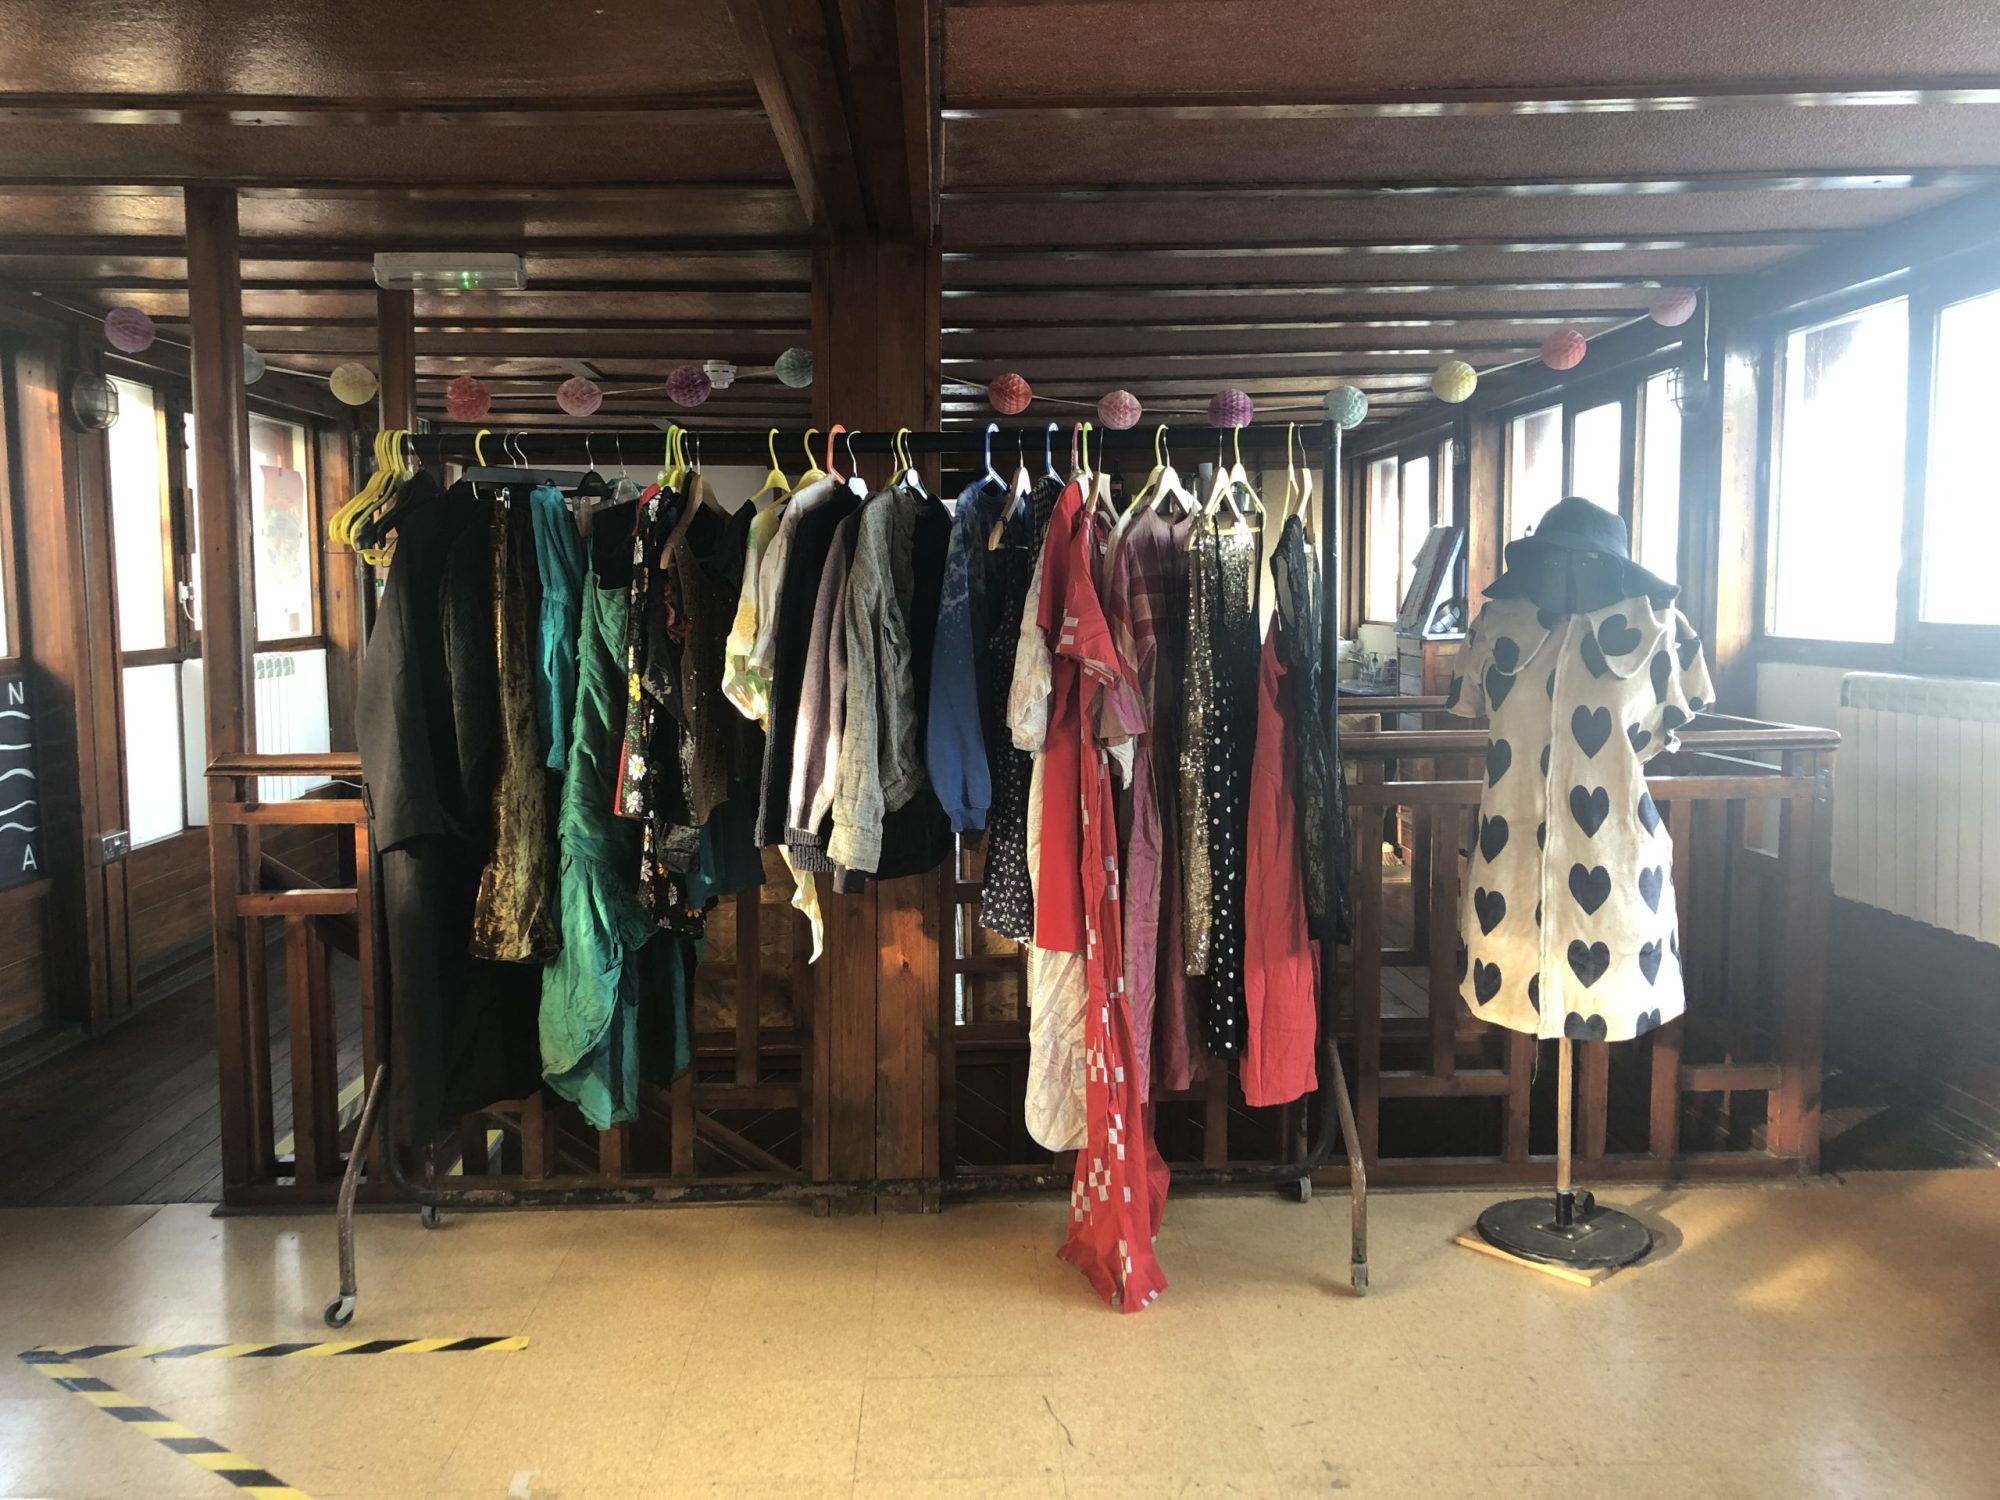 A photograph of a clothes rail with different colourful clothes hanging on it.